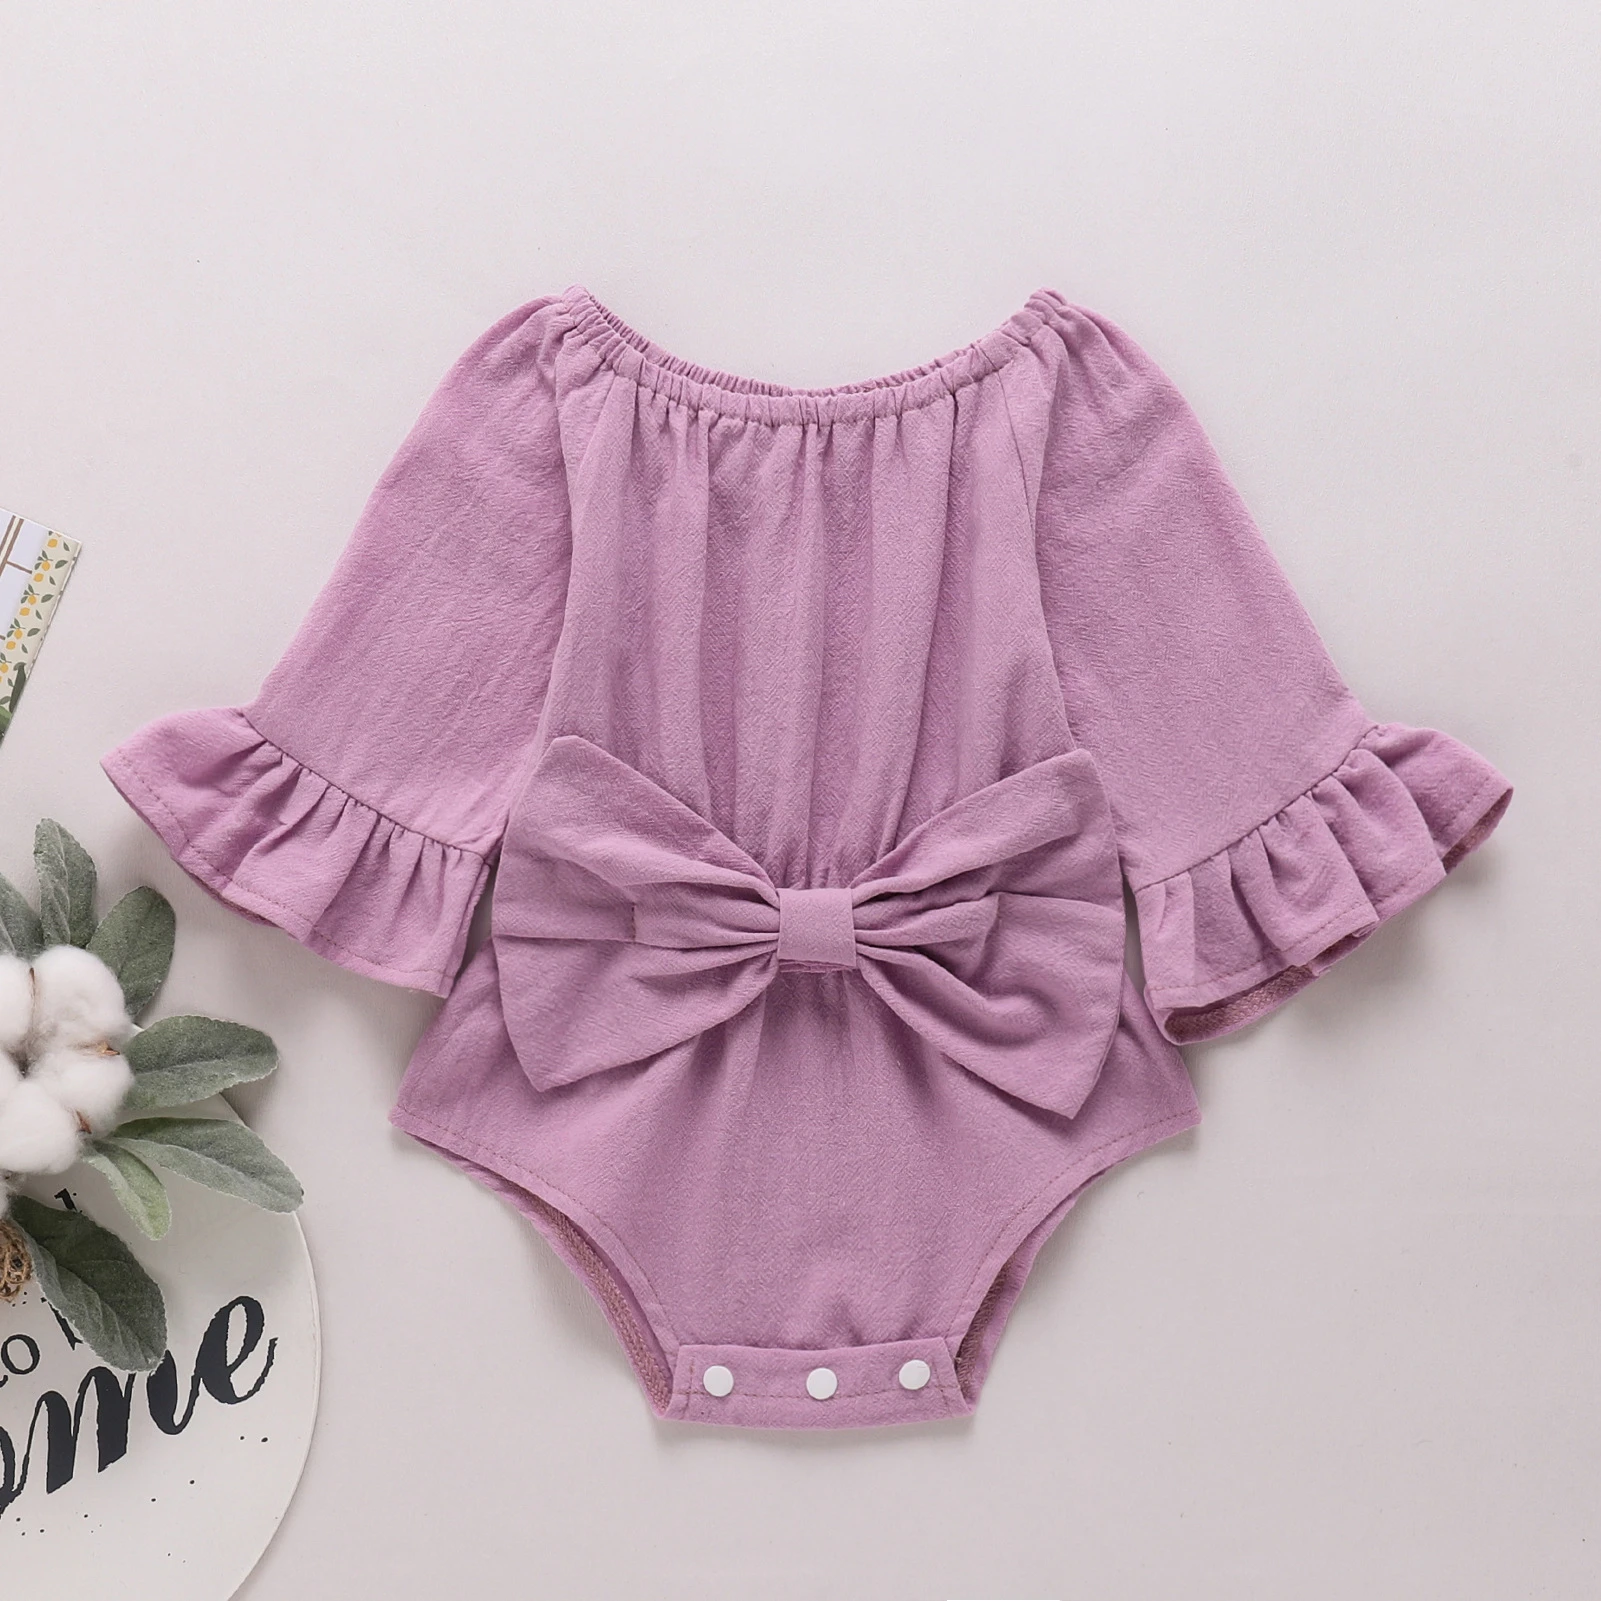 Cute Infant Baby Girls Romper Newborn Infant Baby Girls Romper Cotton Flare Sleeve Baby Playsuit Jumpsuit Infant Bowknot Rompers Onepiece Clothes bright baby bodysuits	